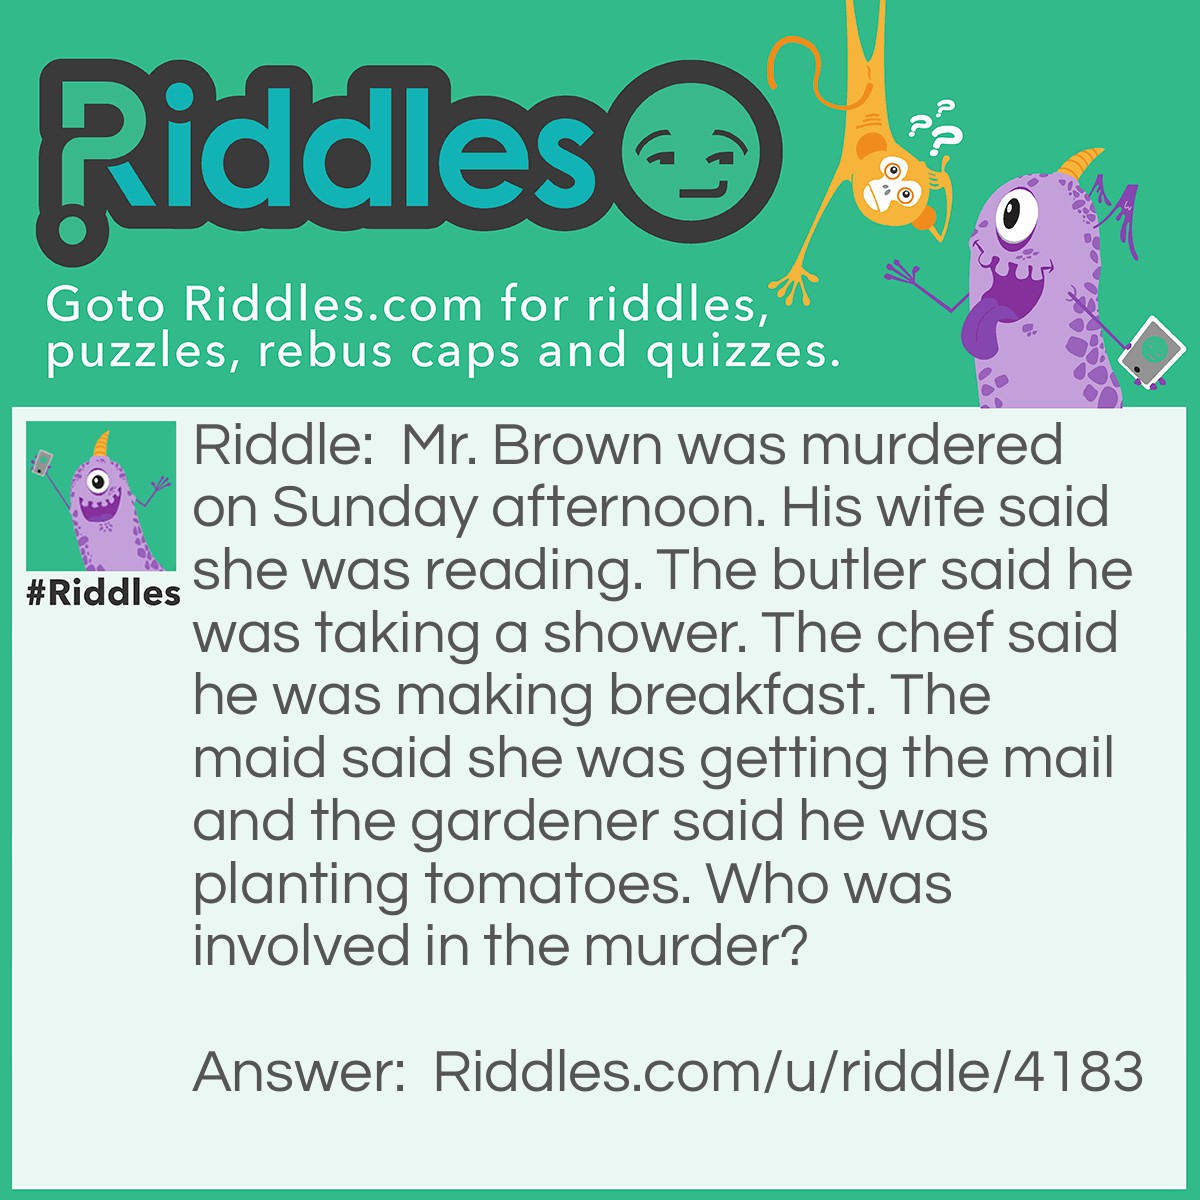 Riddle: Mr. Brown was murdered on Sunday afternoon. His wife said she was reading. The butler said he was taking a shower. The chef said he was making breakfast. The maid said she was getting the mail and the gardener said he was planting tomatoes. Who was involved in the murder? Answer: The chef. Who eats breakfast in the afternoon?